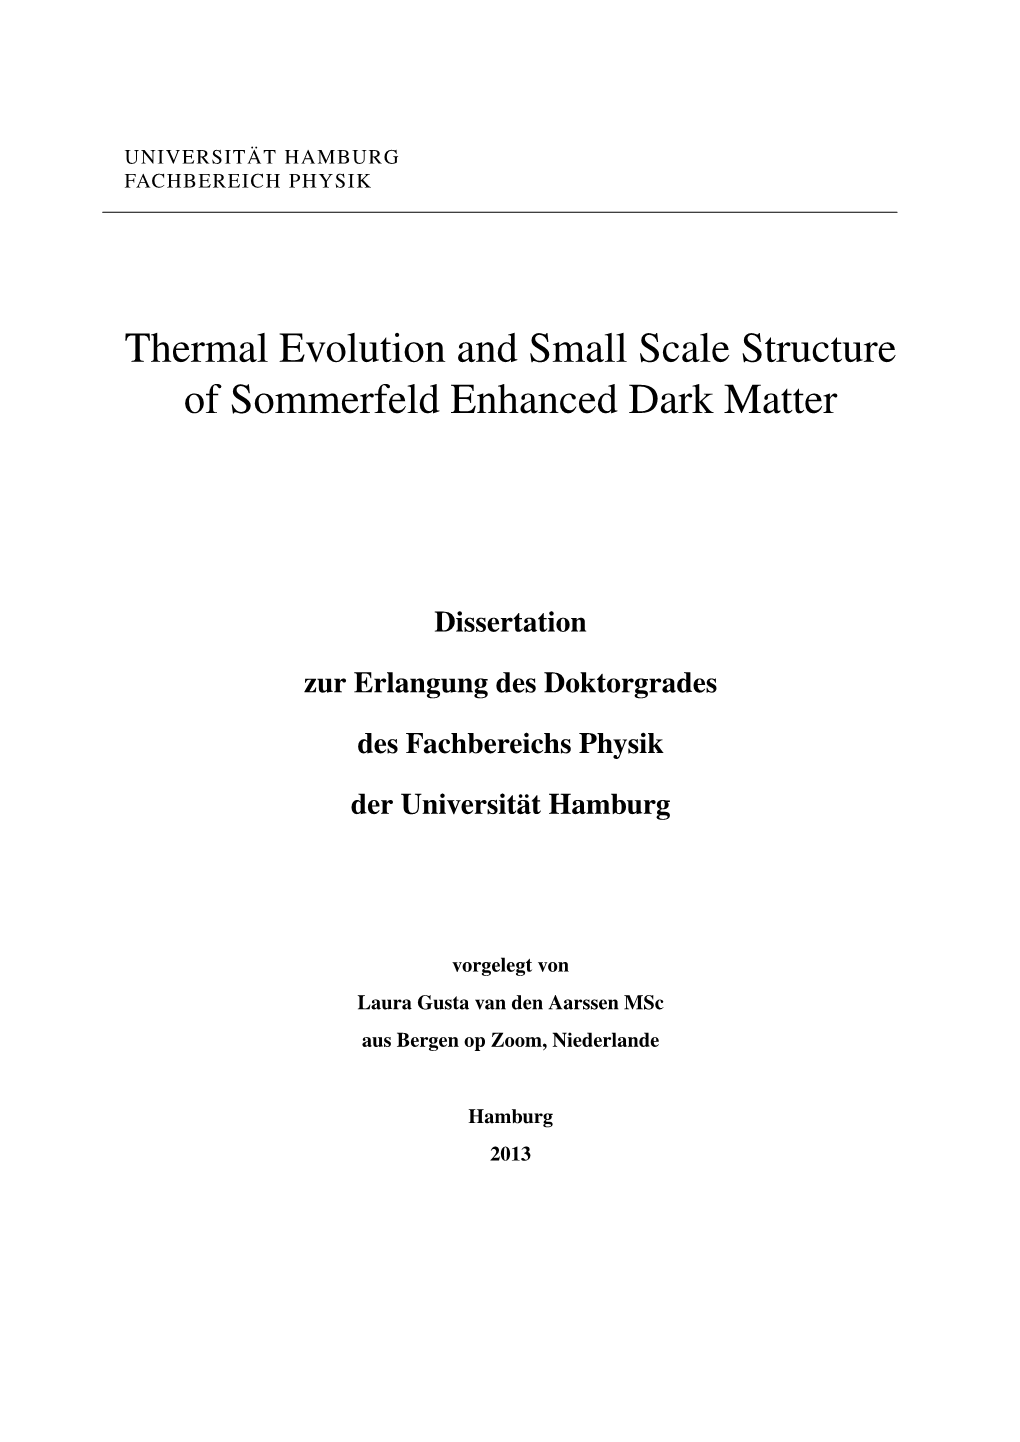 Thermal Evolution and Small Scale Structure of Sommerfeld Enhanced Dark Matter